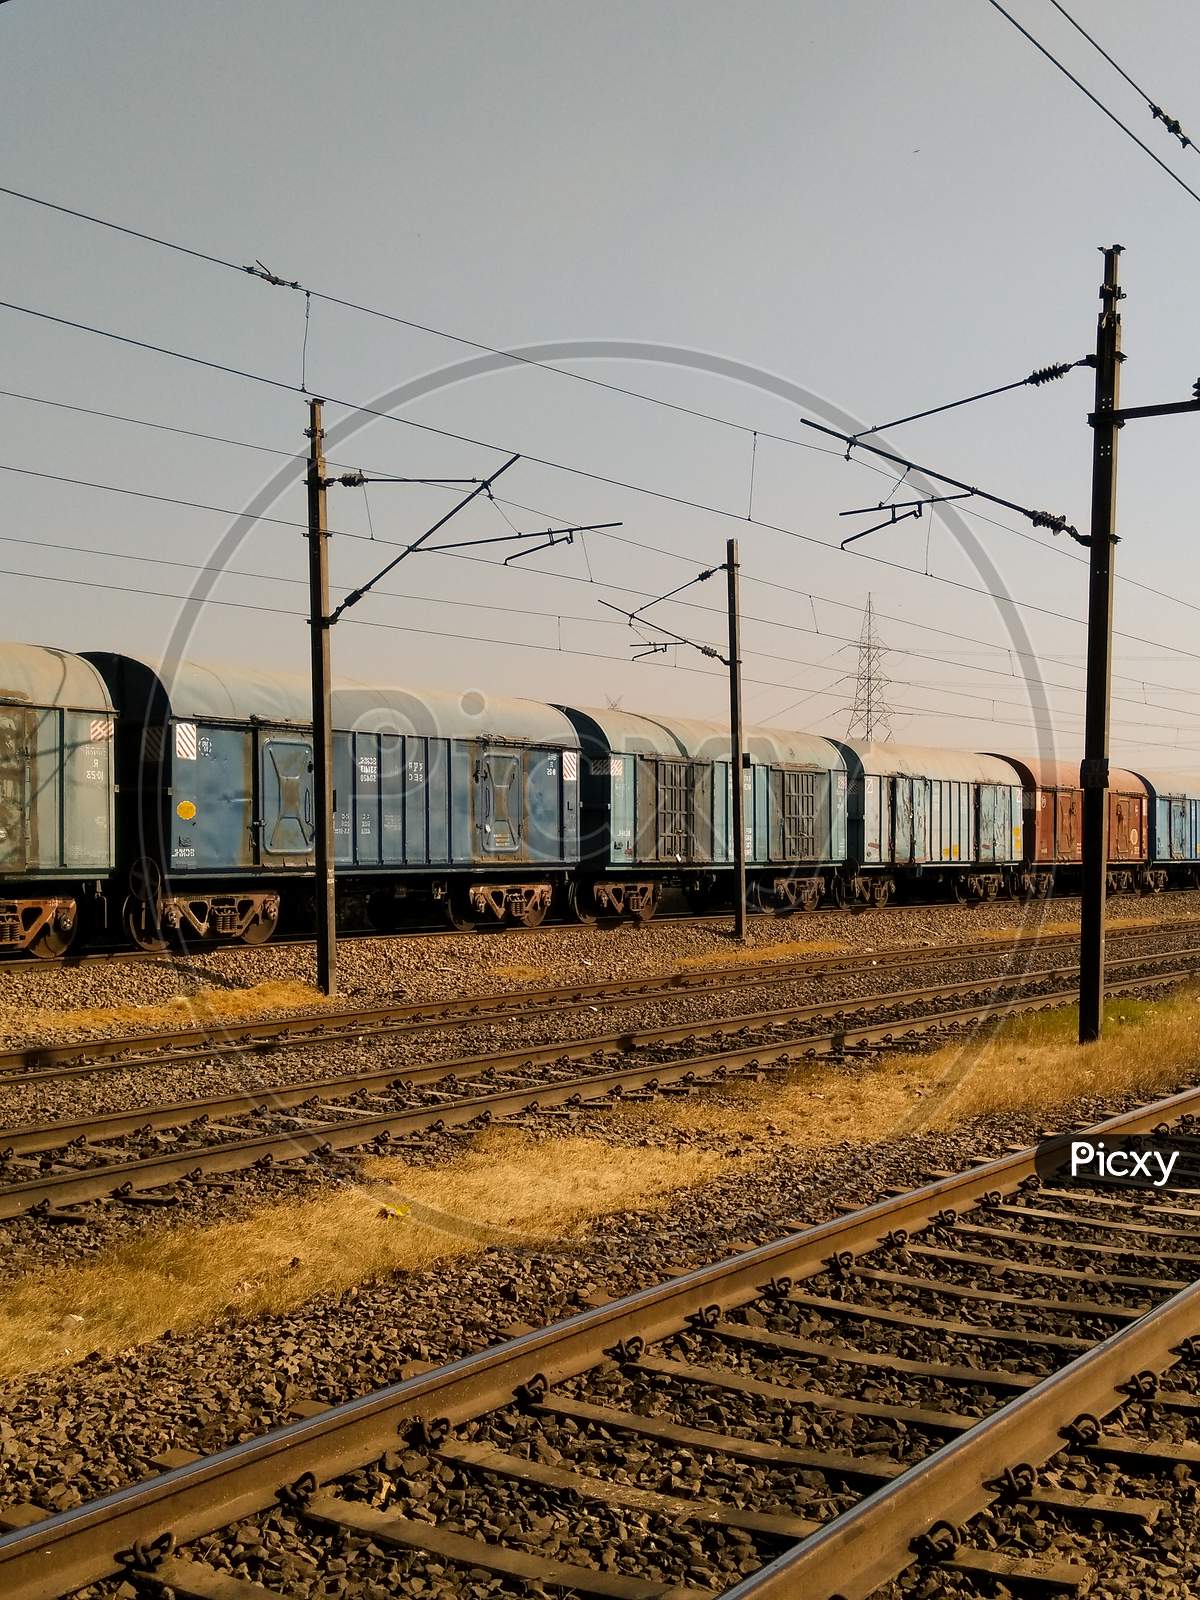 Electric Poles In an Railway Station Compound With Tracks And Trains